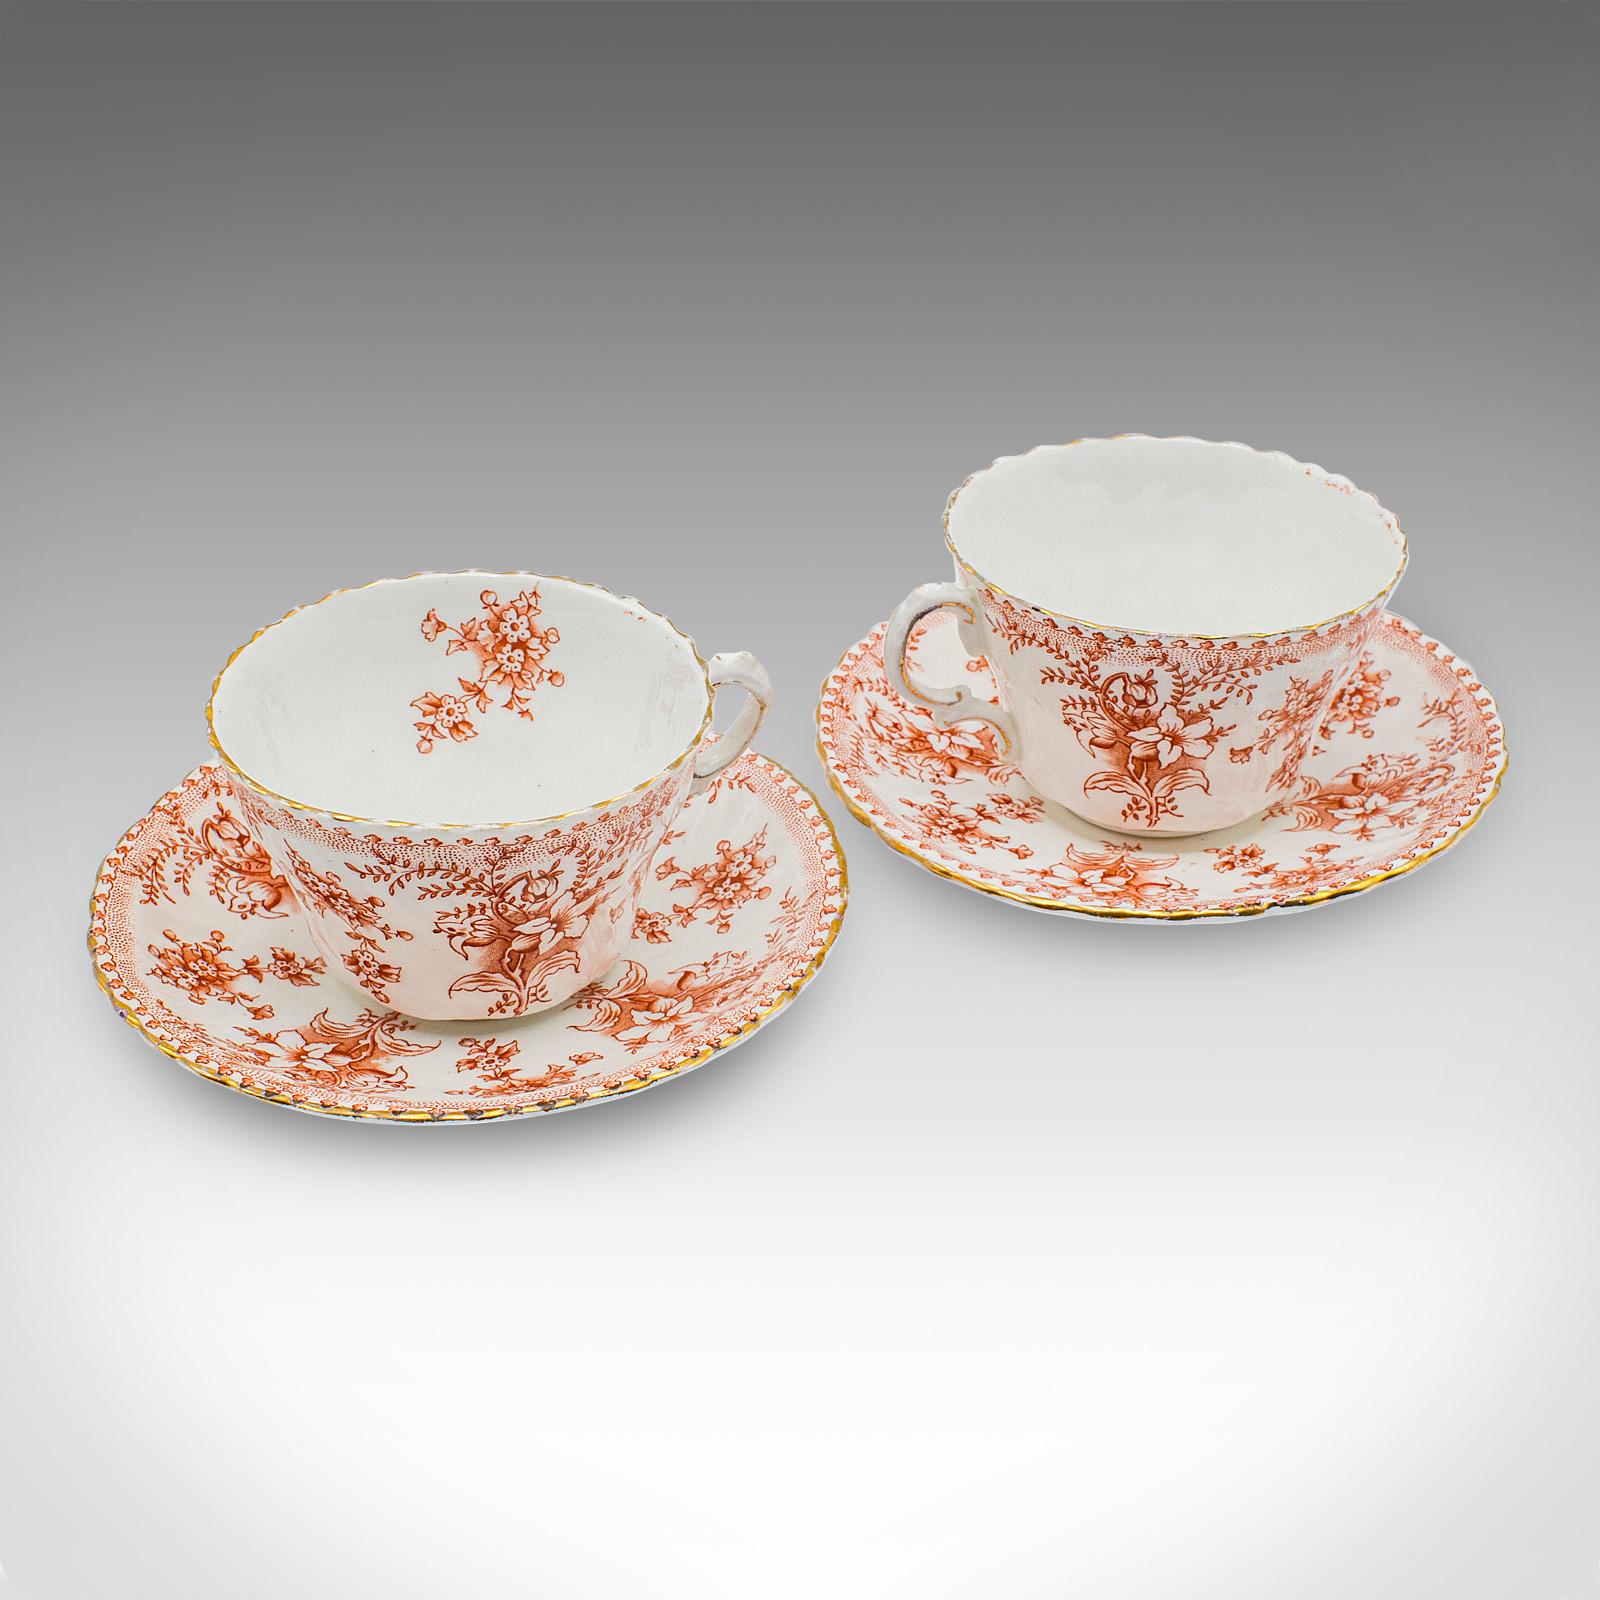 British Antique Afternoon Tea Set, English, Bone China, Cup & Saucer, Plate, Victorian For Sale